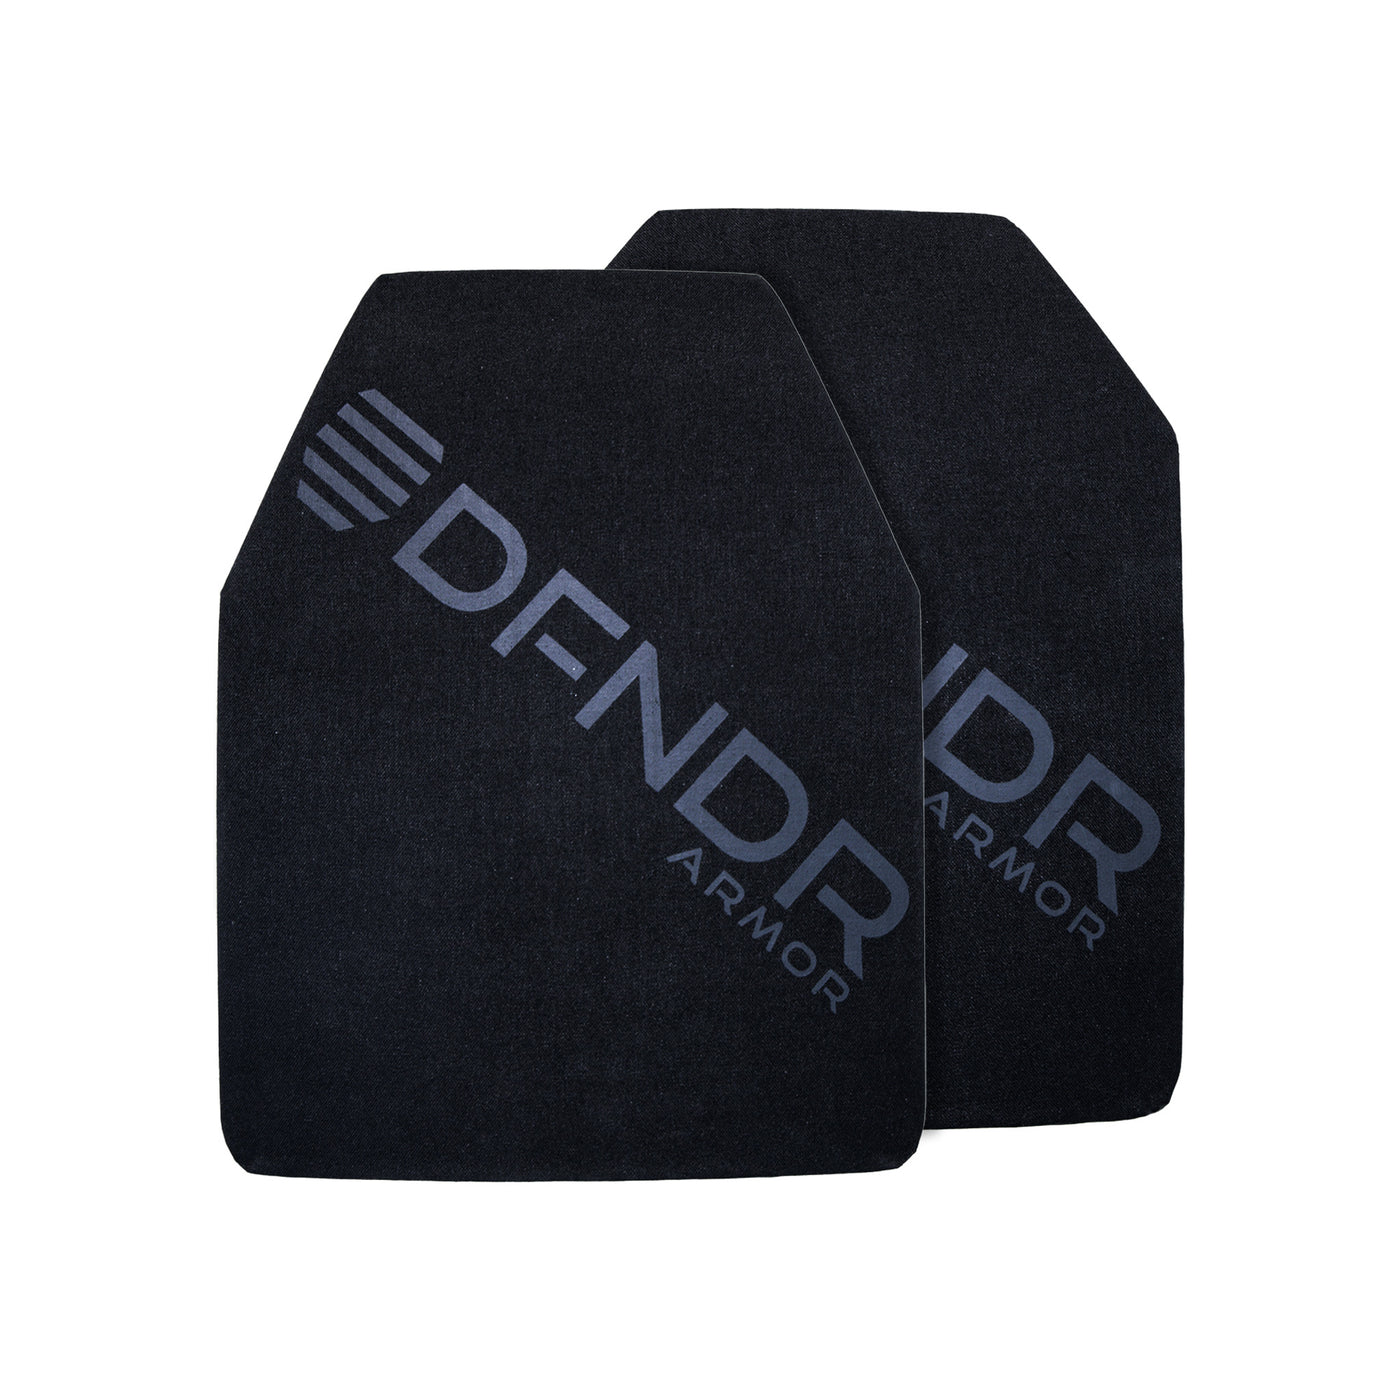 DFNDR Armor RF1 Elite Stand-Alone Plates (Pair) for ICEPLATE EXO®